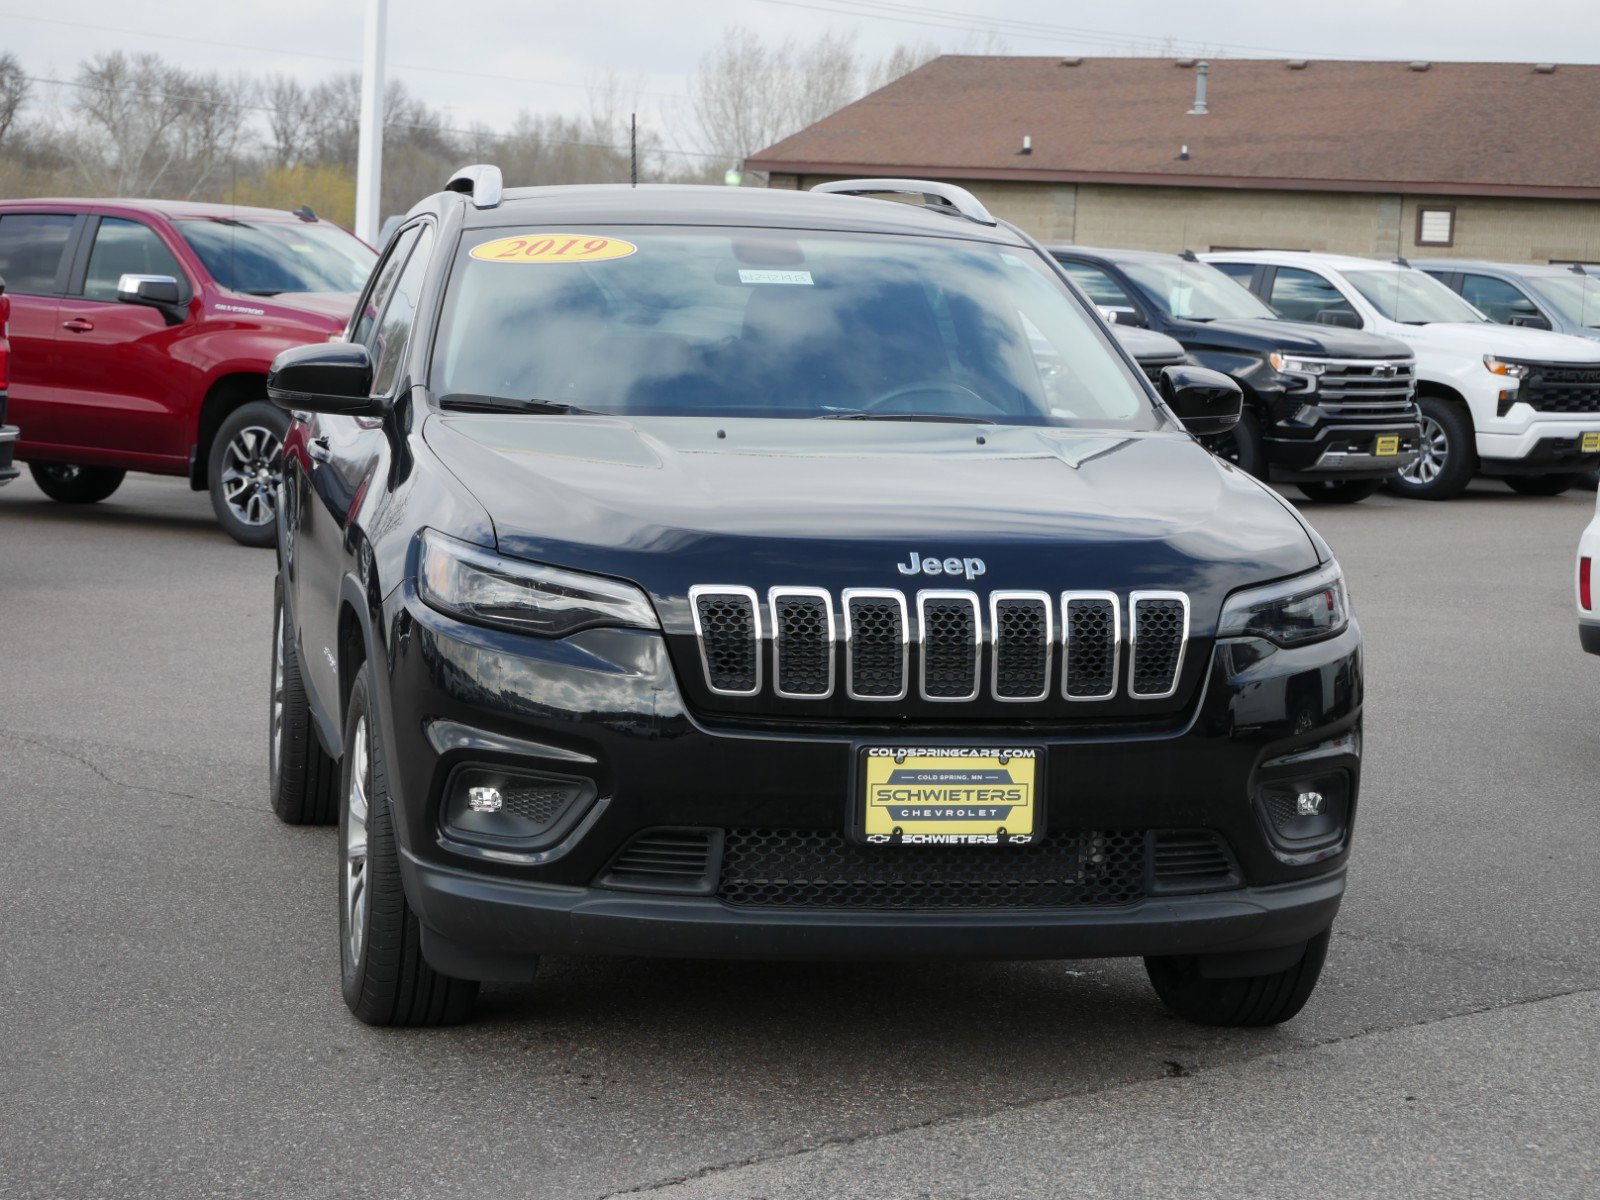 Used 2019 Jeep Cherokee Latitude Plus with VIN 1C4PJMLX6KD111899 for sale in Cold Spring, Minnesota